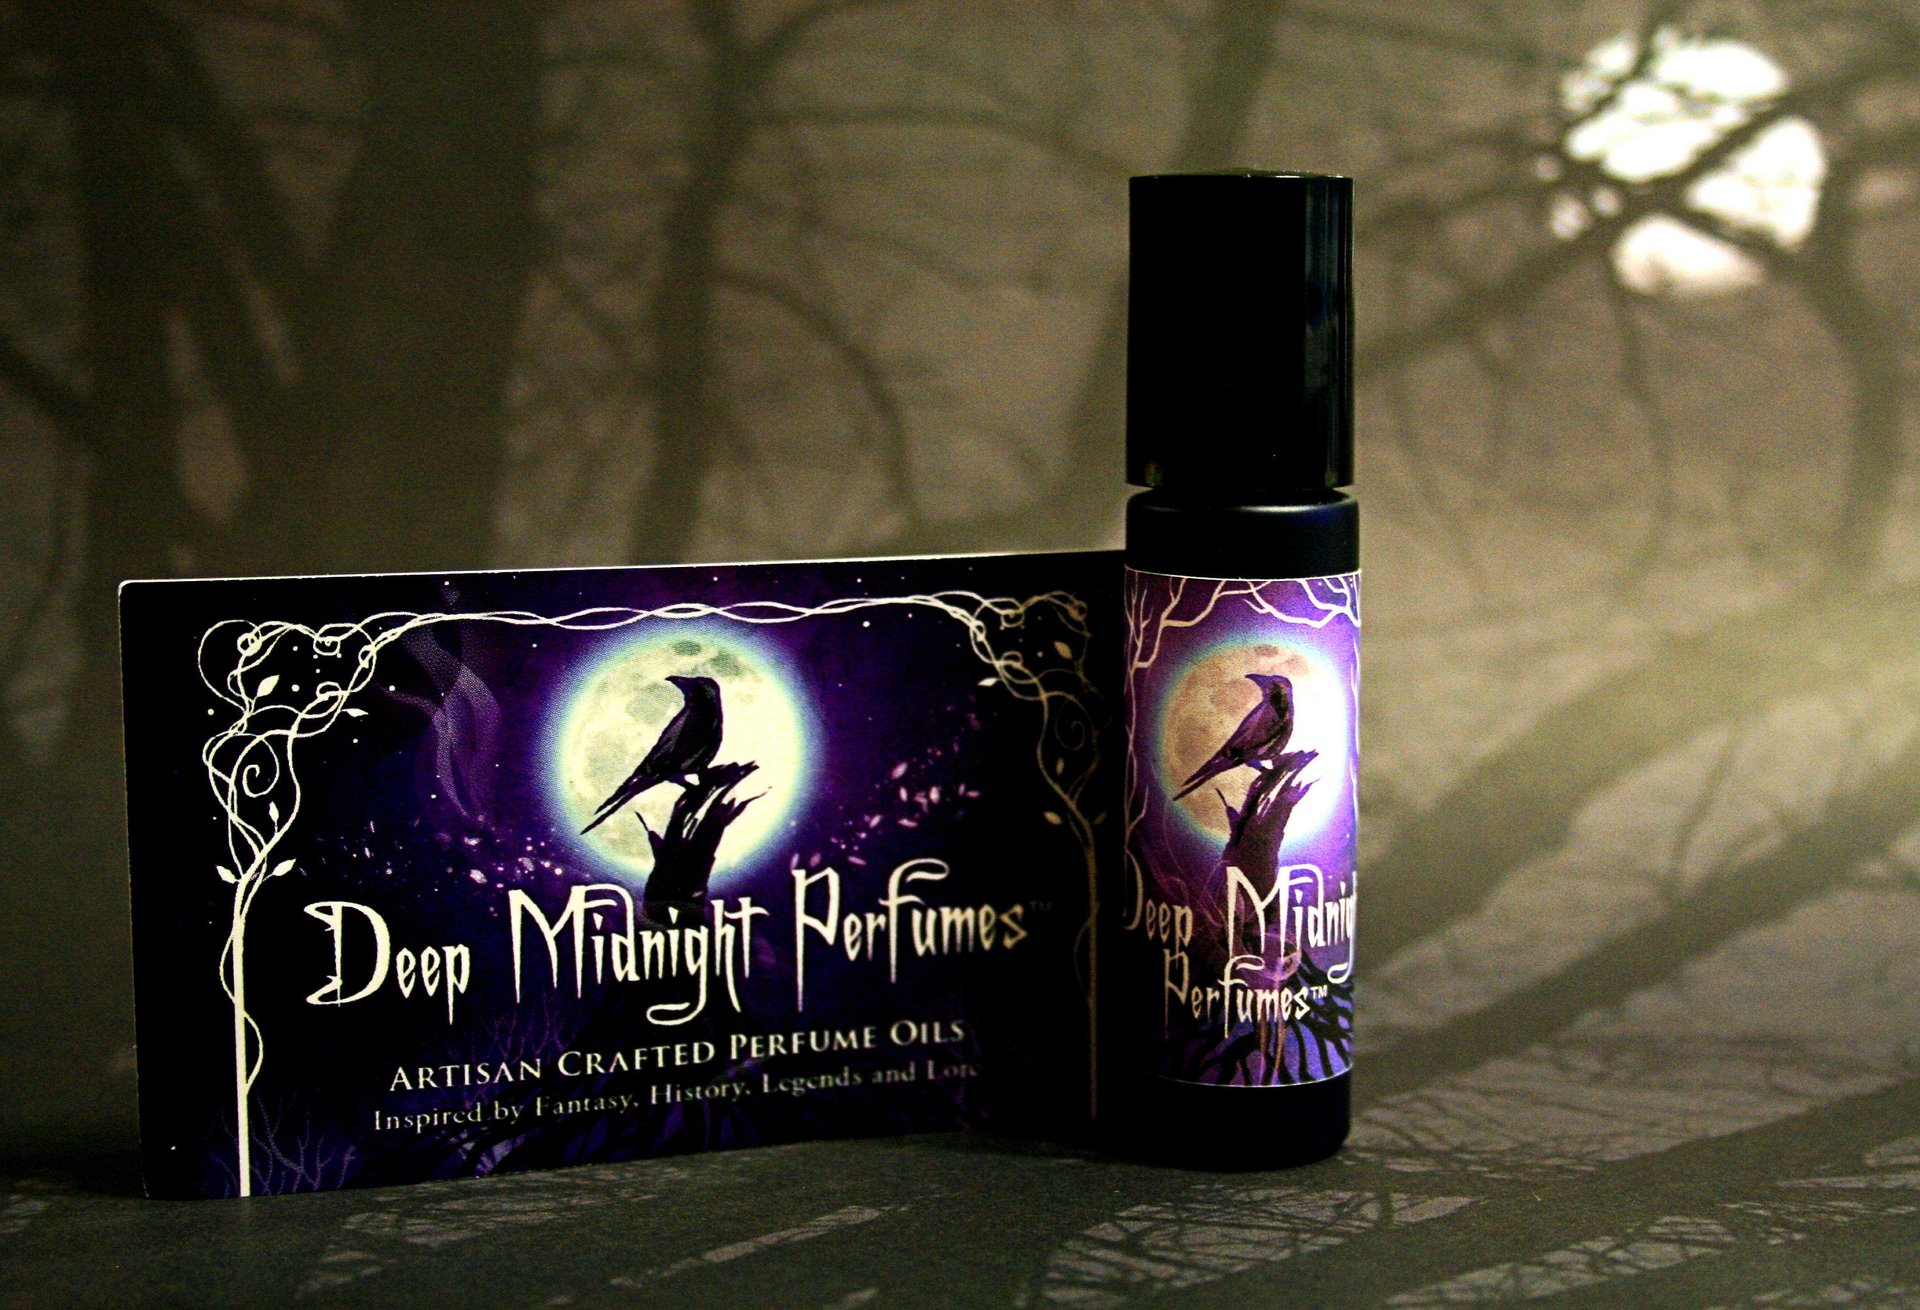 HOUSE of HEALING Perfume Oil - Iris Flowers, Linden Blossoms, Woods, Greenery - Fantasy Perfume - Inspired by The Hobbit